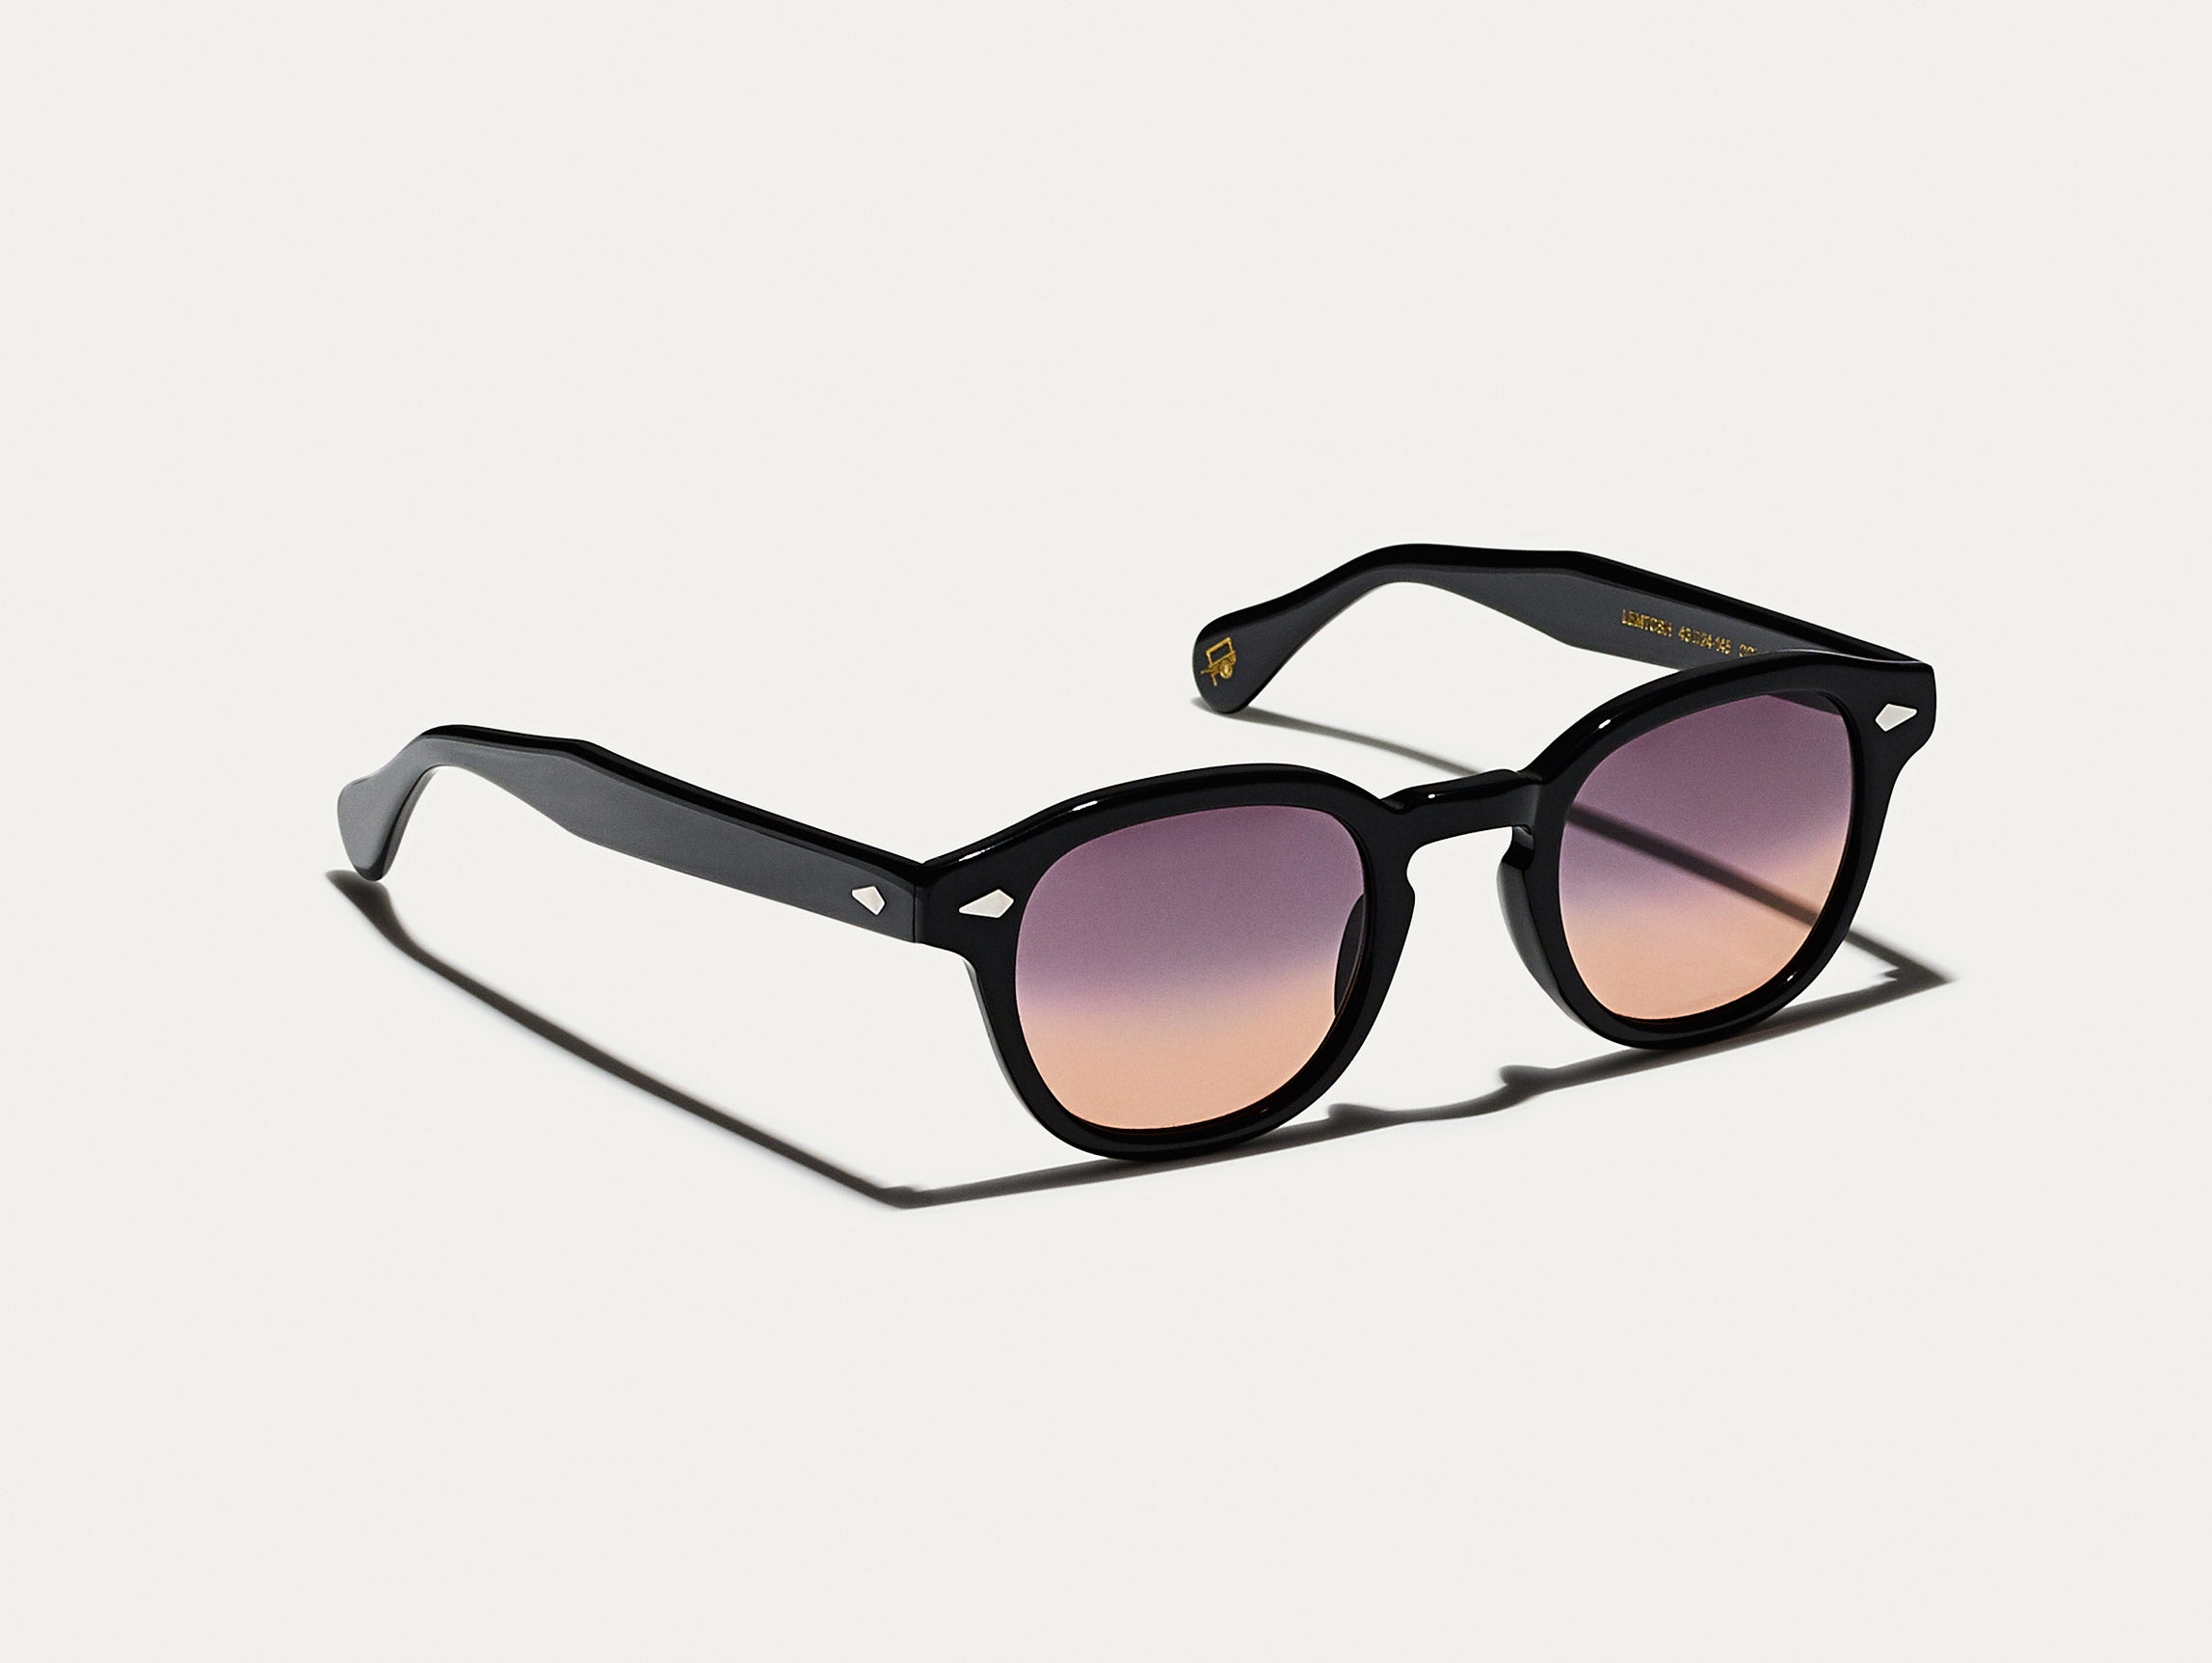 #color_city lights | The LEMTOSH Black with City Lights Tinted Lenses